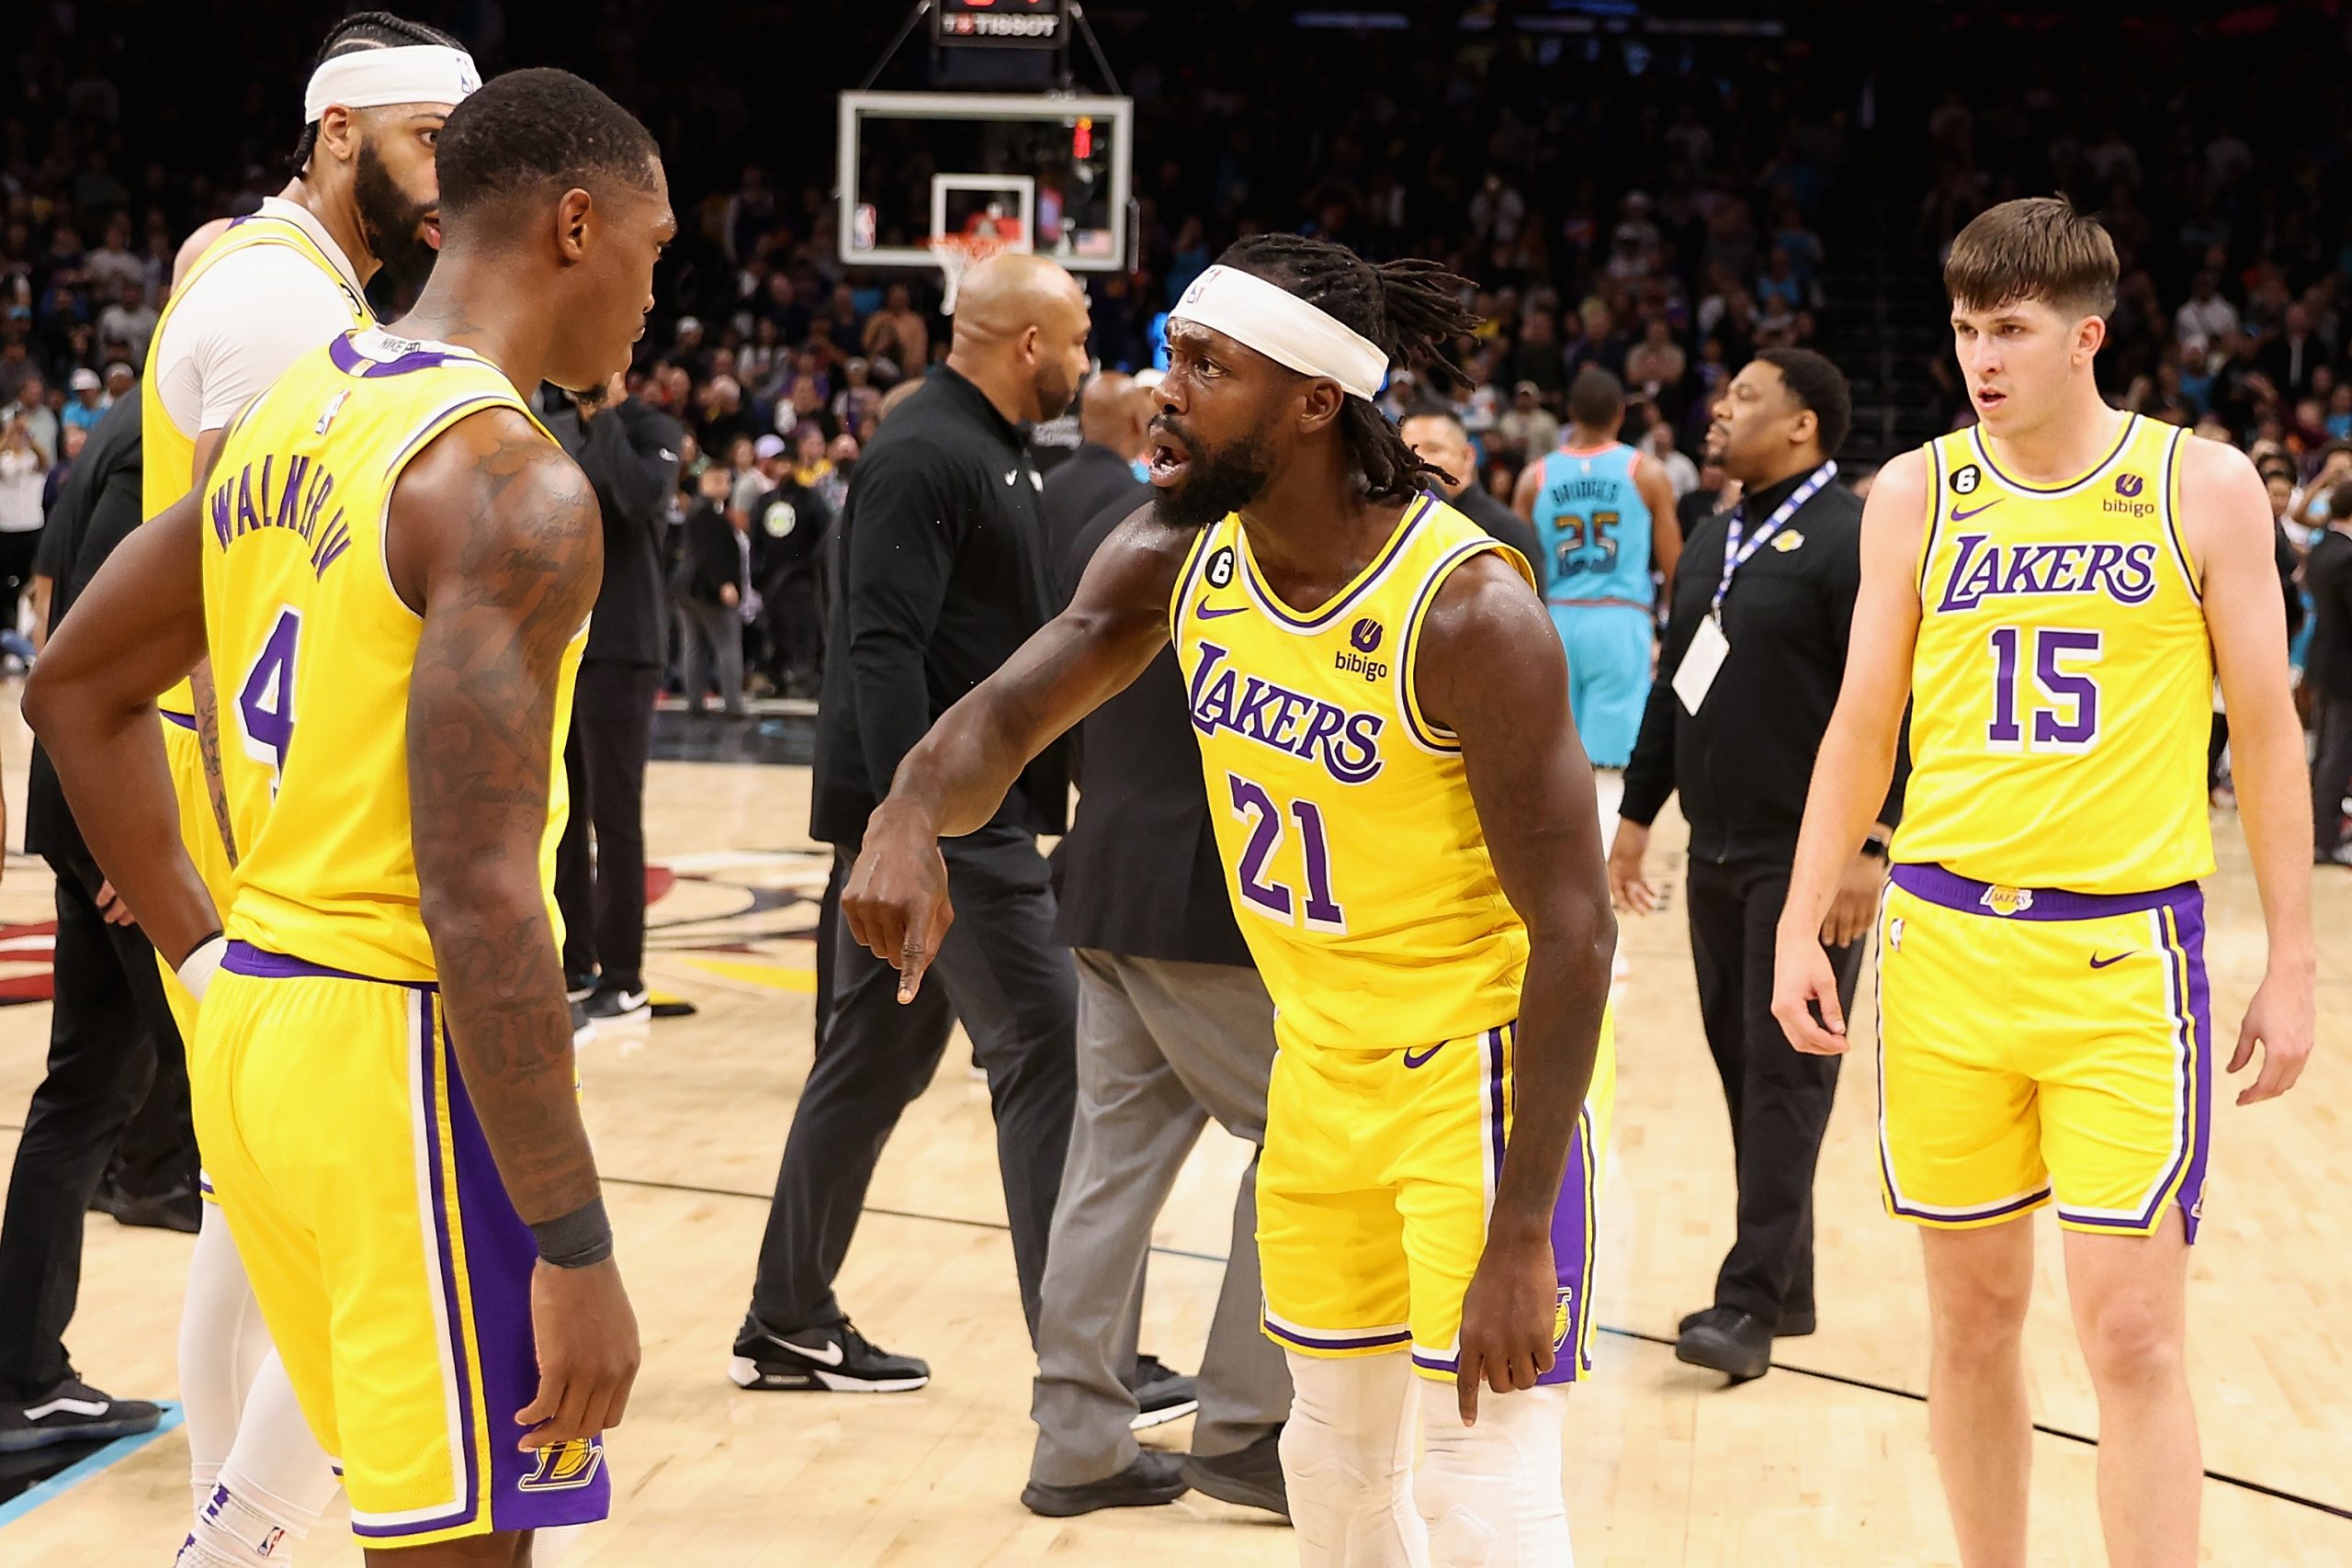 Lakers and Suns Comment on Heated Exchange Between Deandre Ayton and Patrick Beverley